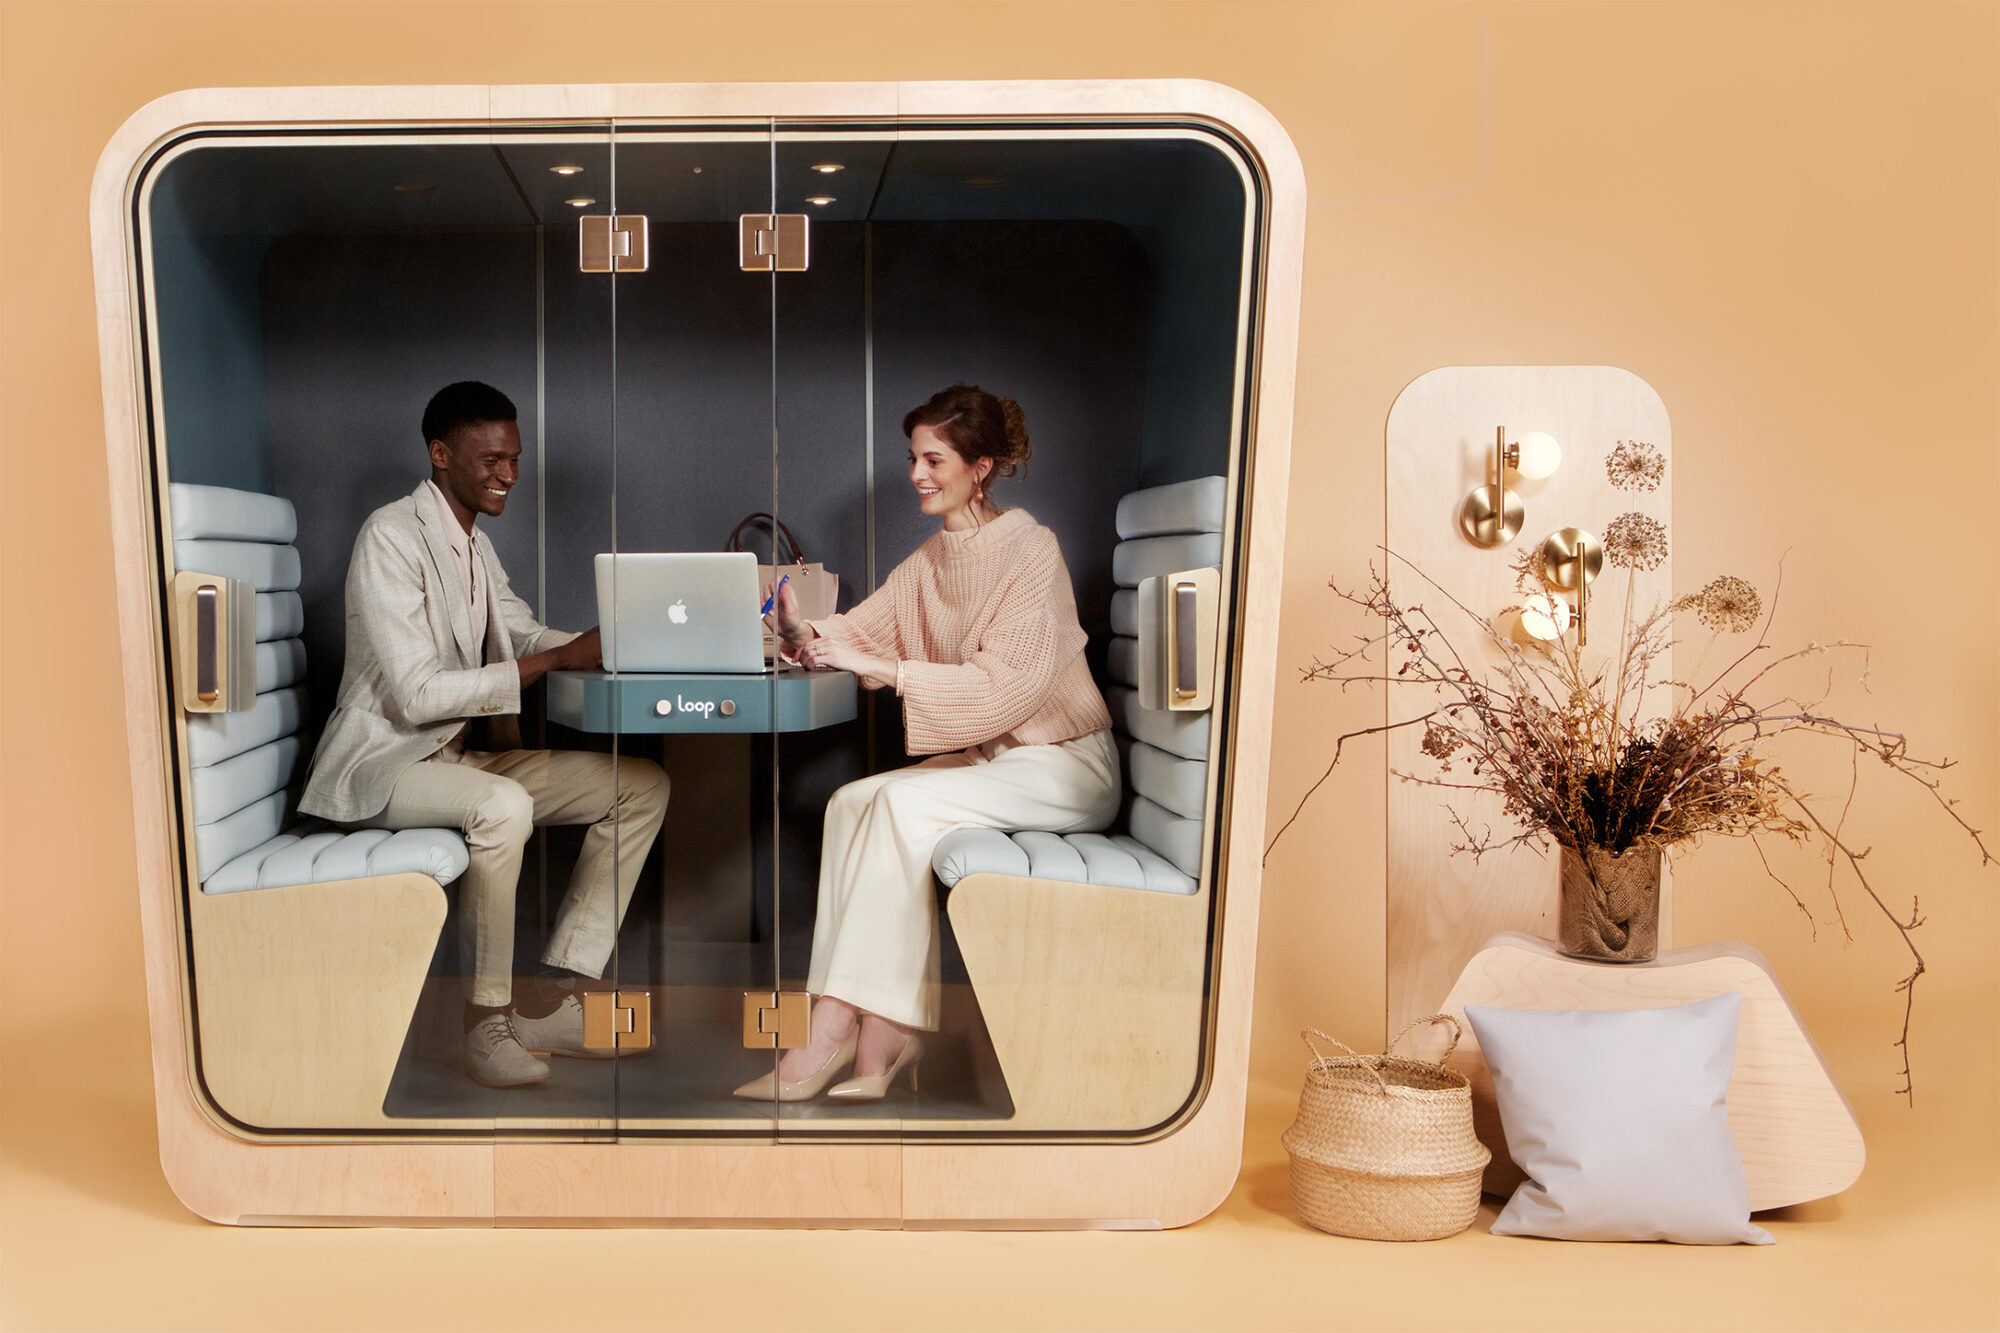 loop cube office meeting pod with two people happily getting work done inside of it